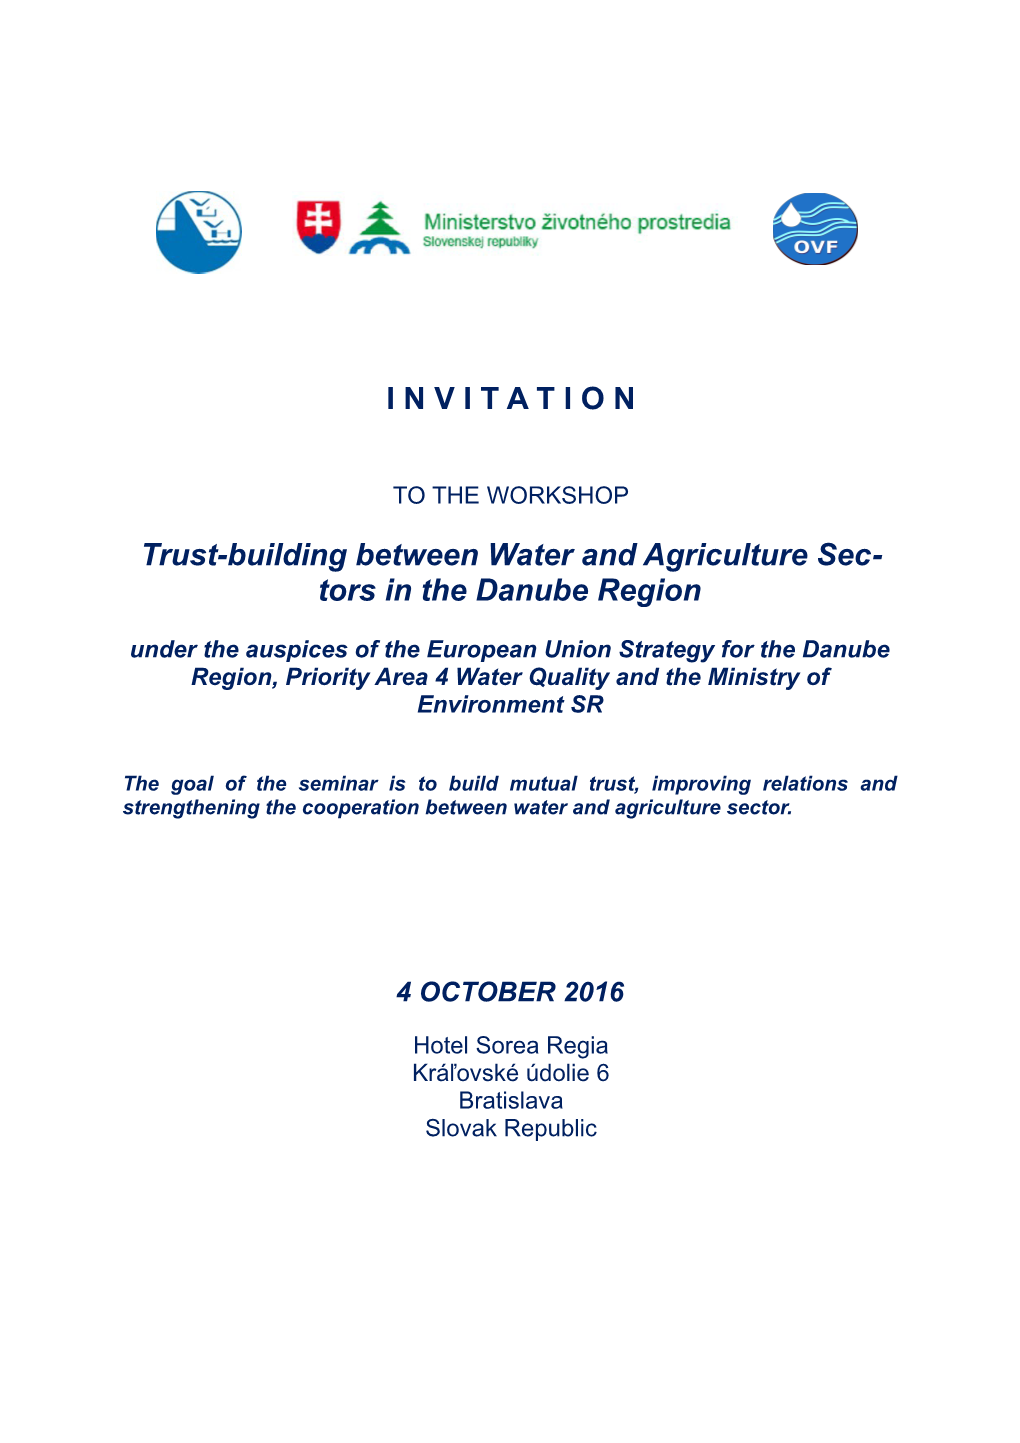 Trust-Building Between Water and Agriculture Sectors in the Danube Region